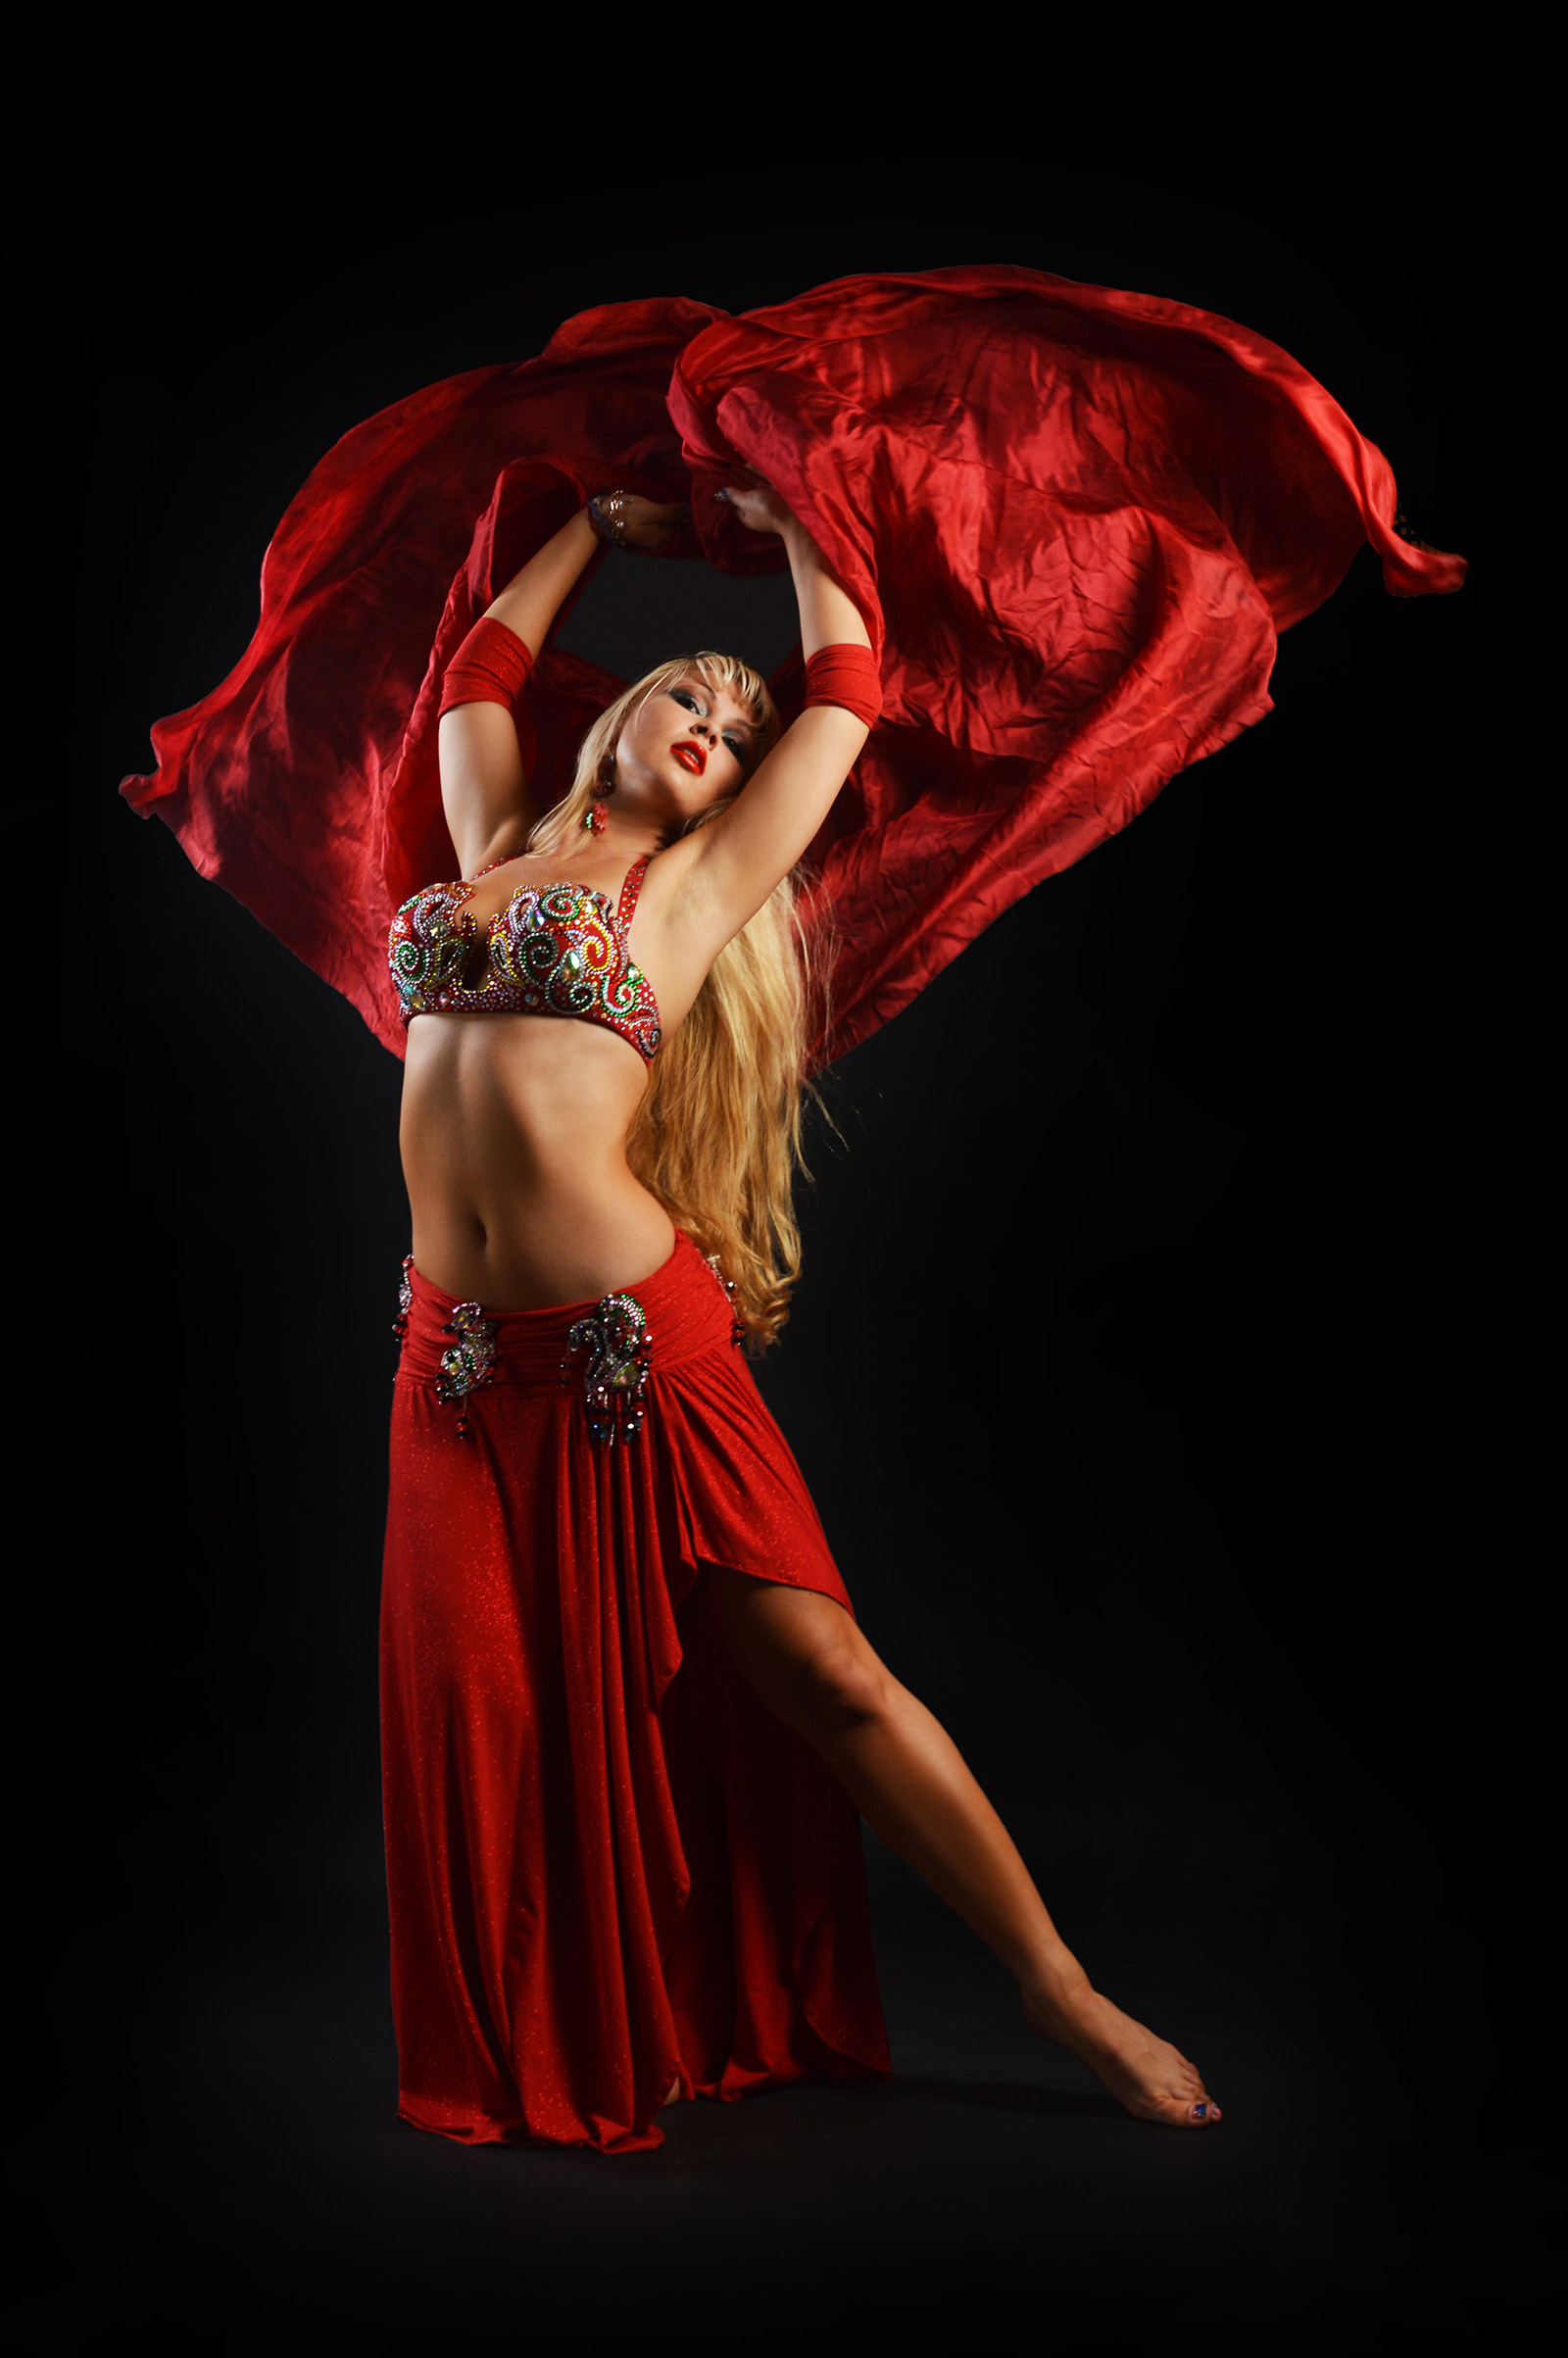 Shalilah - Online Belly Dancing Artist and Teacher - Dance With Me India - Poland Dubai UK Suisse Global